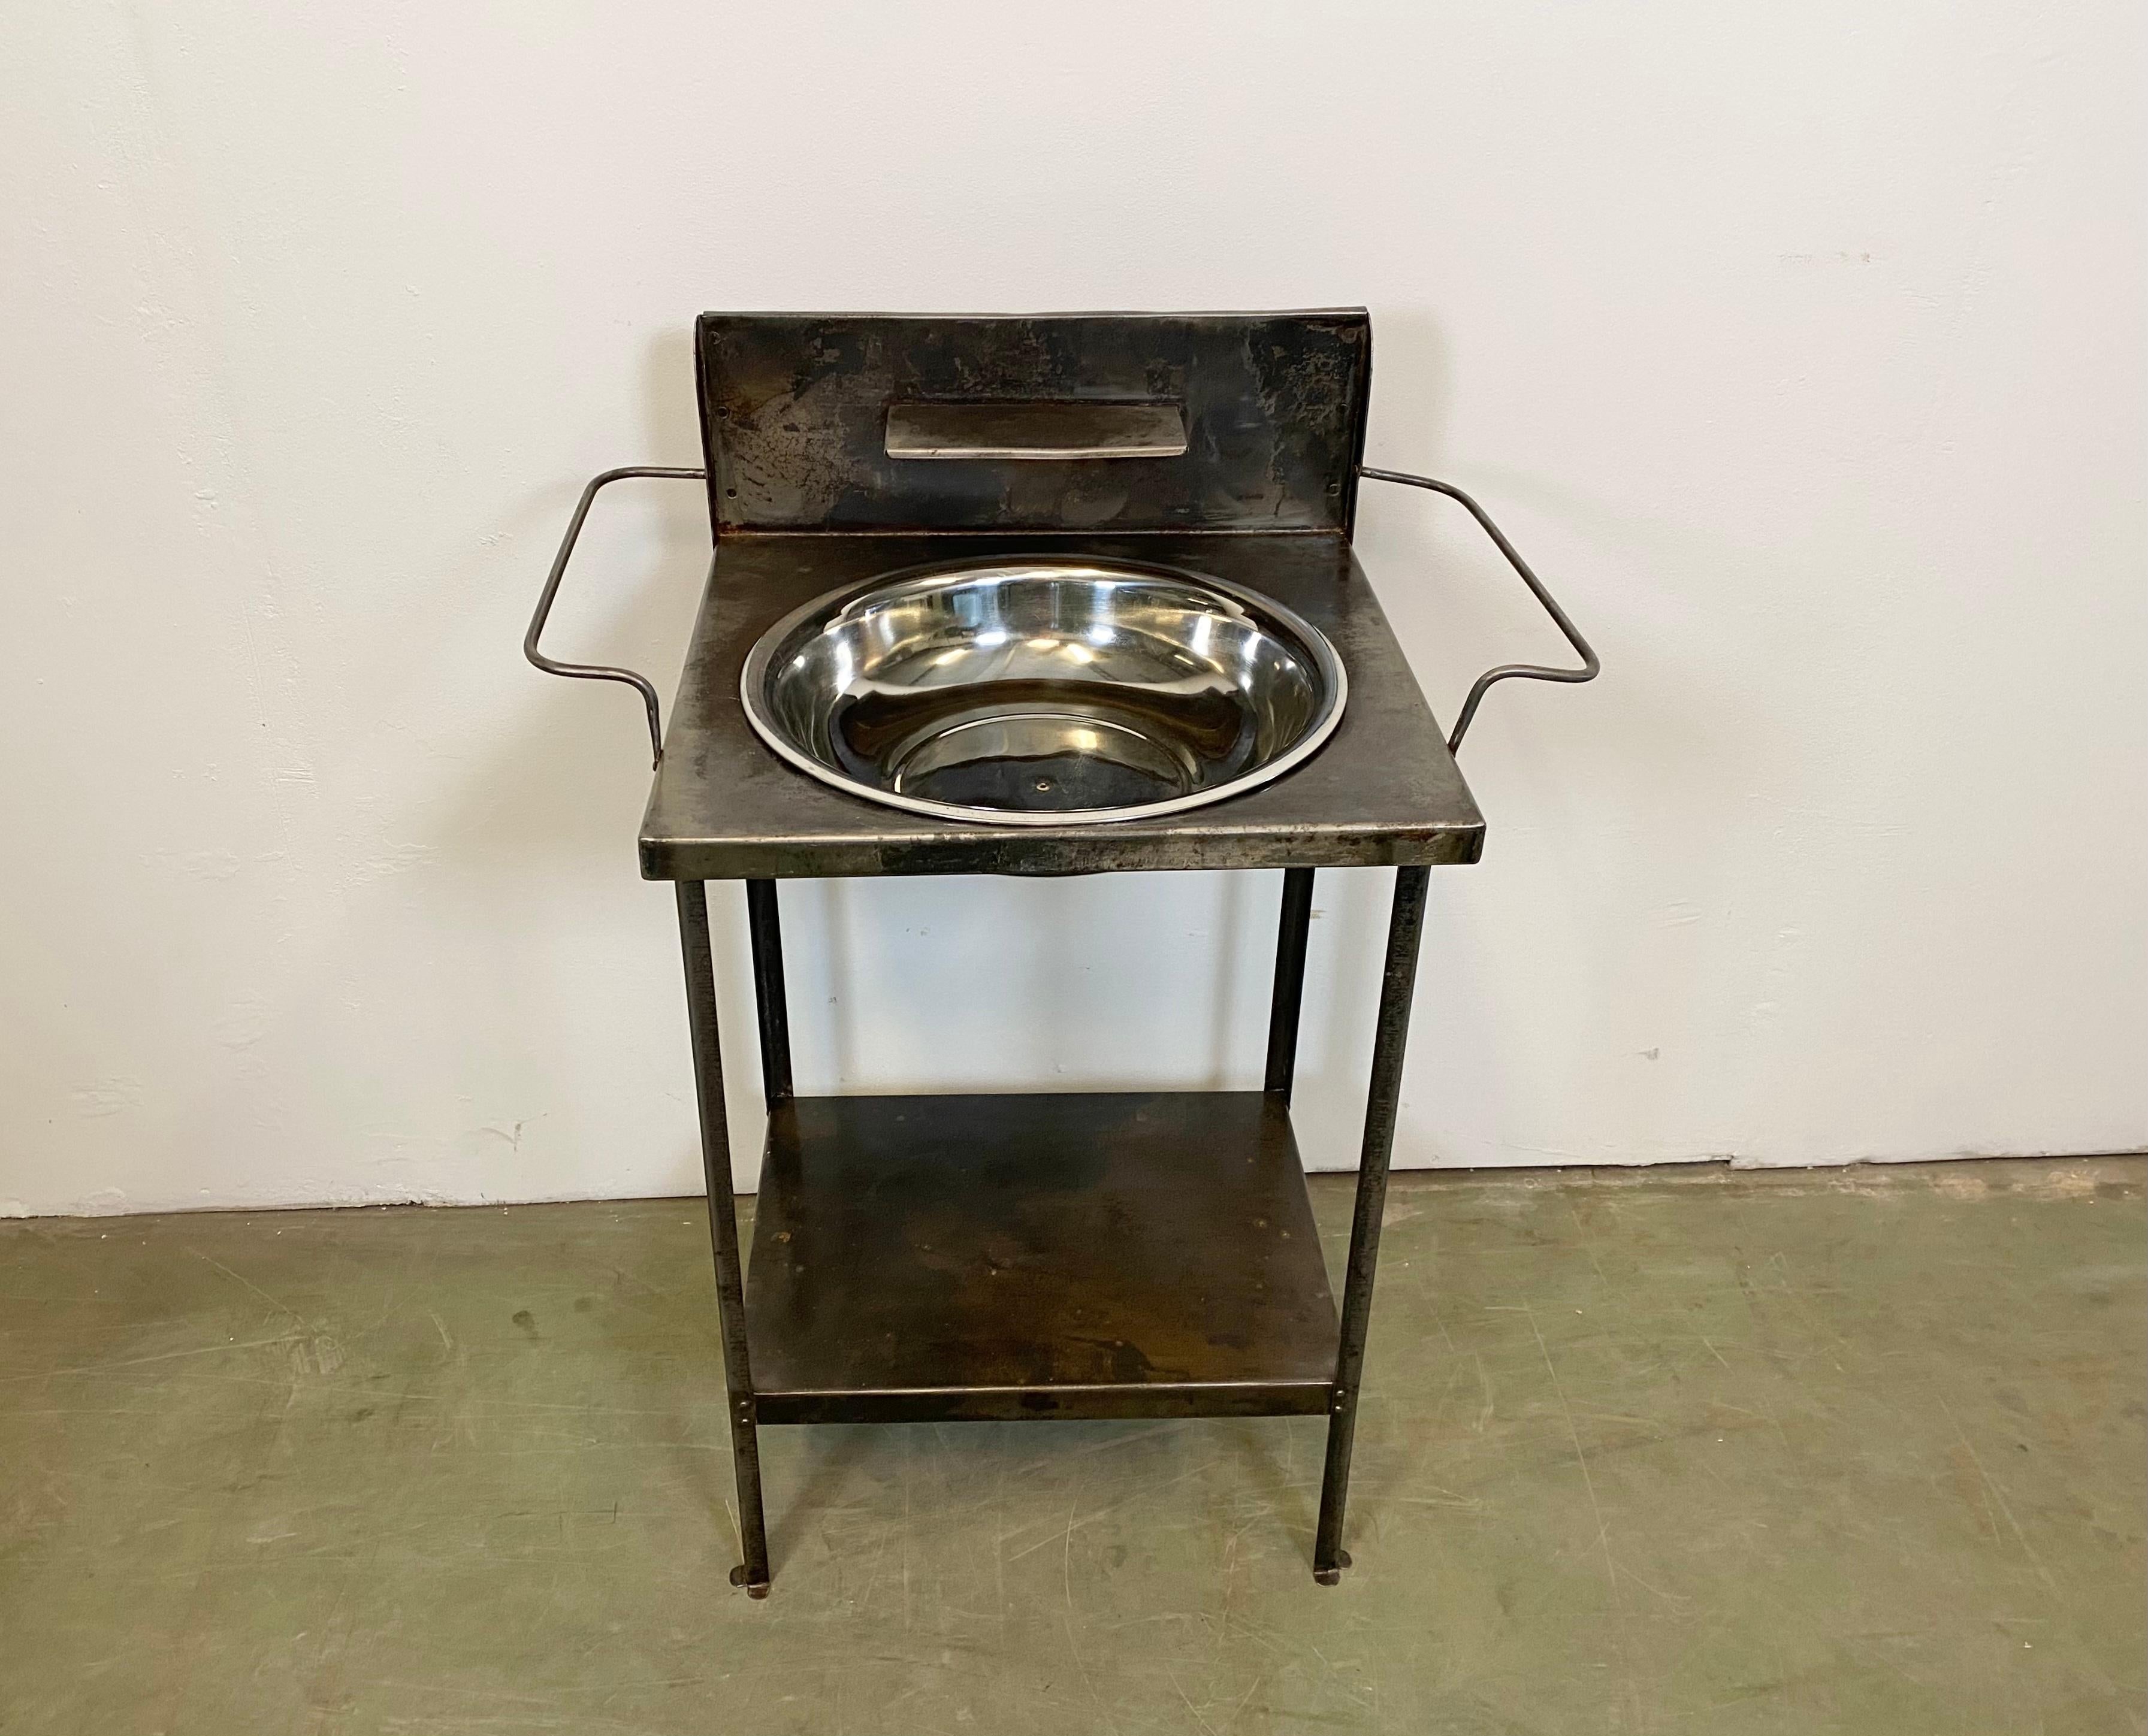 - Vintage, industrial, brushed hospital wash basin.
- Made during the 1960s.
- It features a metal, 2-tier construction and a stainless steel wash basin. 
- Weight: 6 kg.